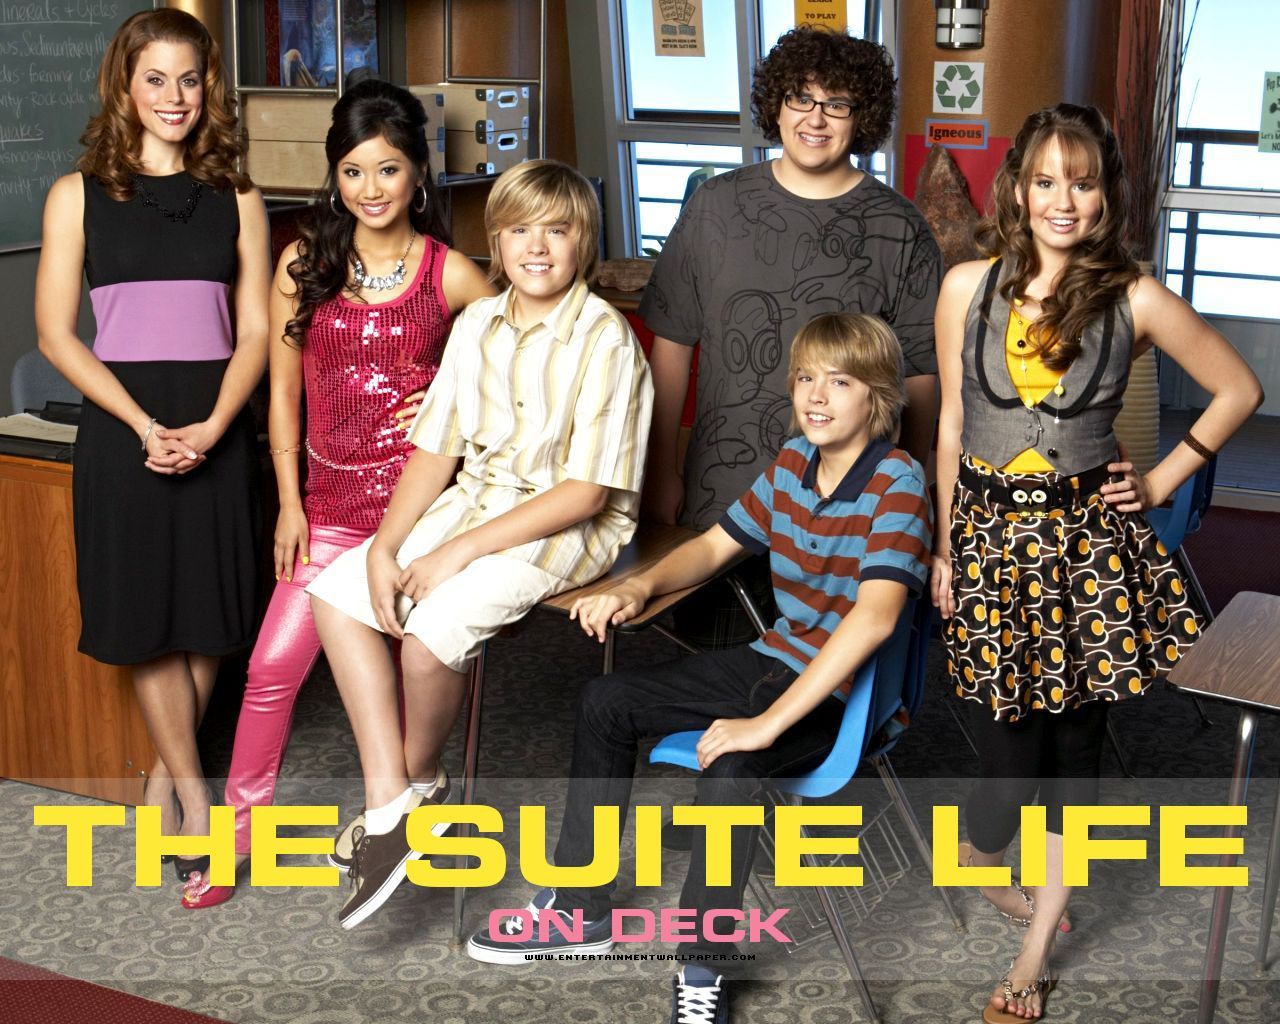 Suite Life On Deck Wallpaper: the suite life on deck. Suite life, Sweet life on deck, Suit life on deck